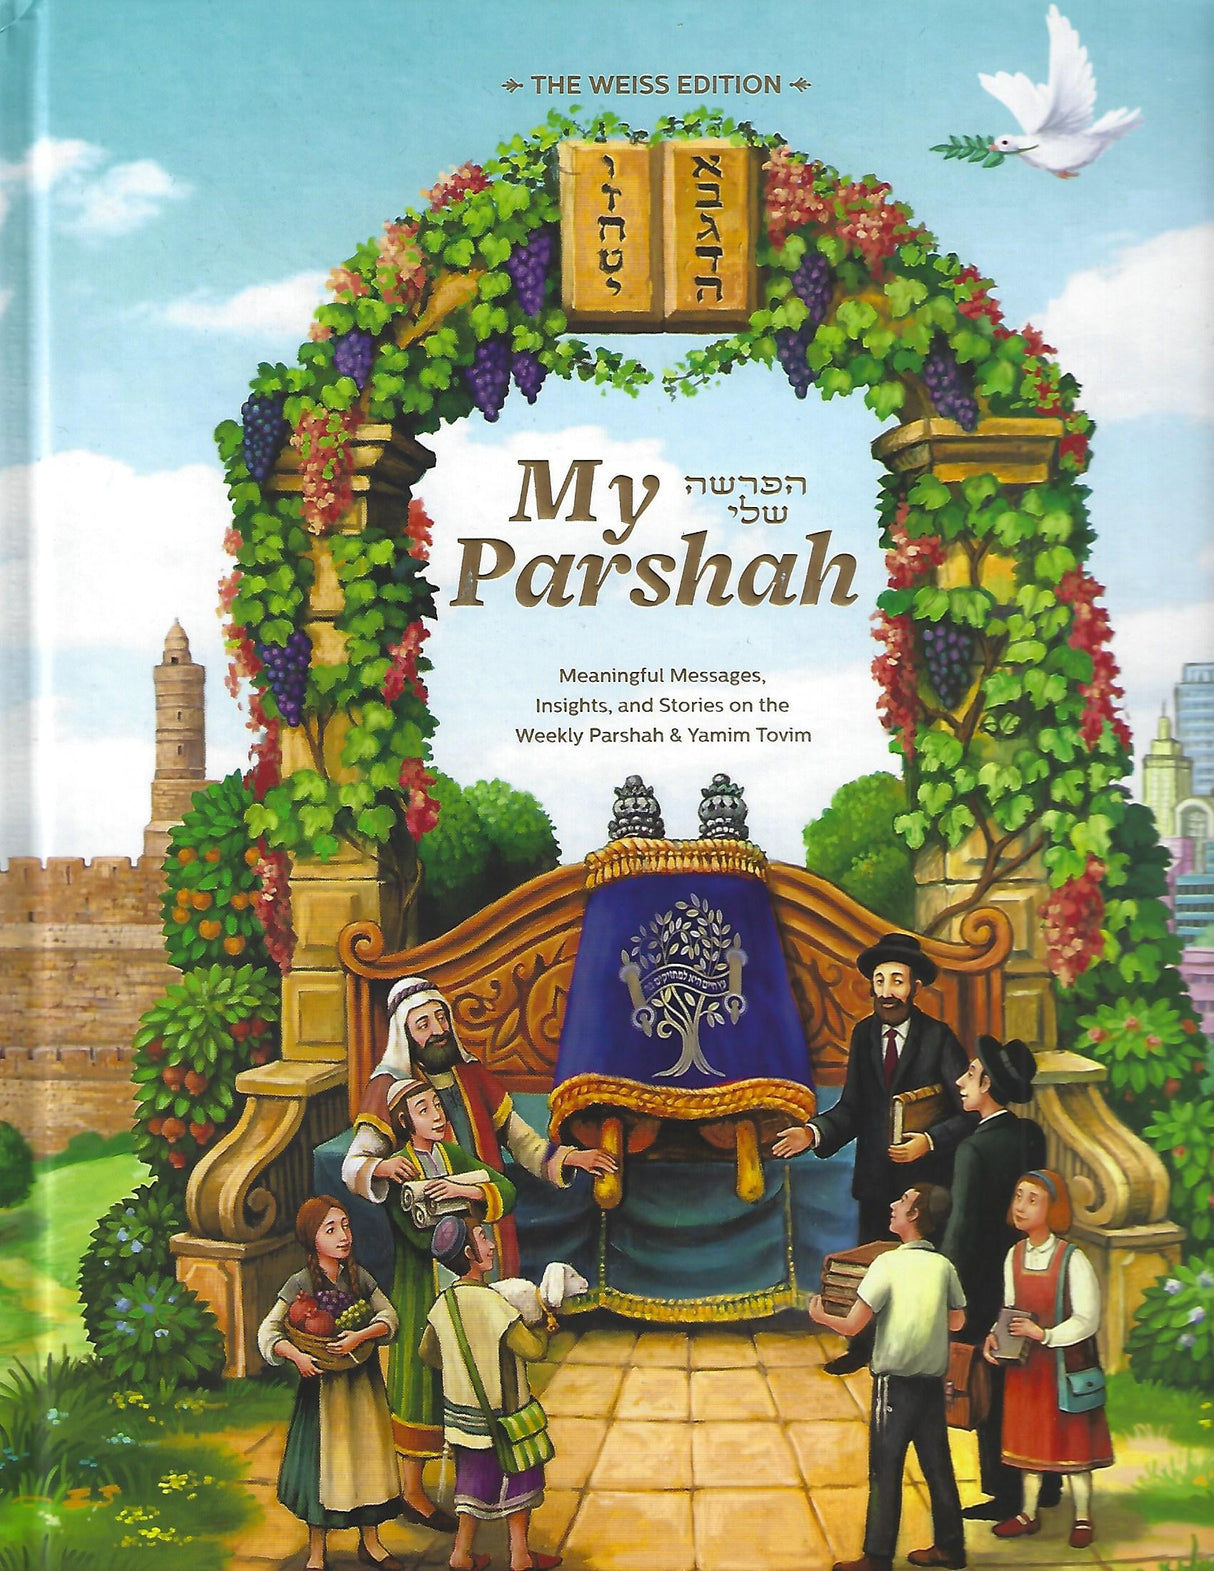 My Parshah - Insights & Stories - Living Lessons